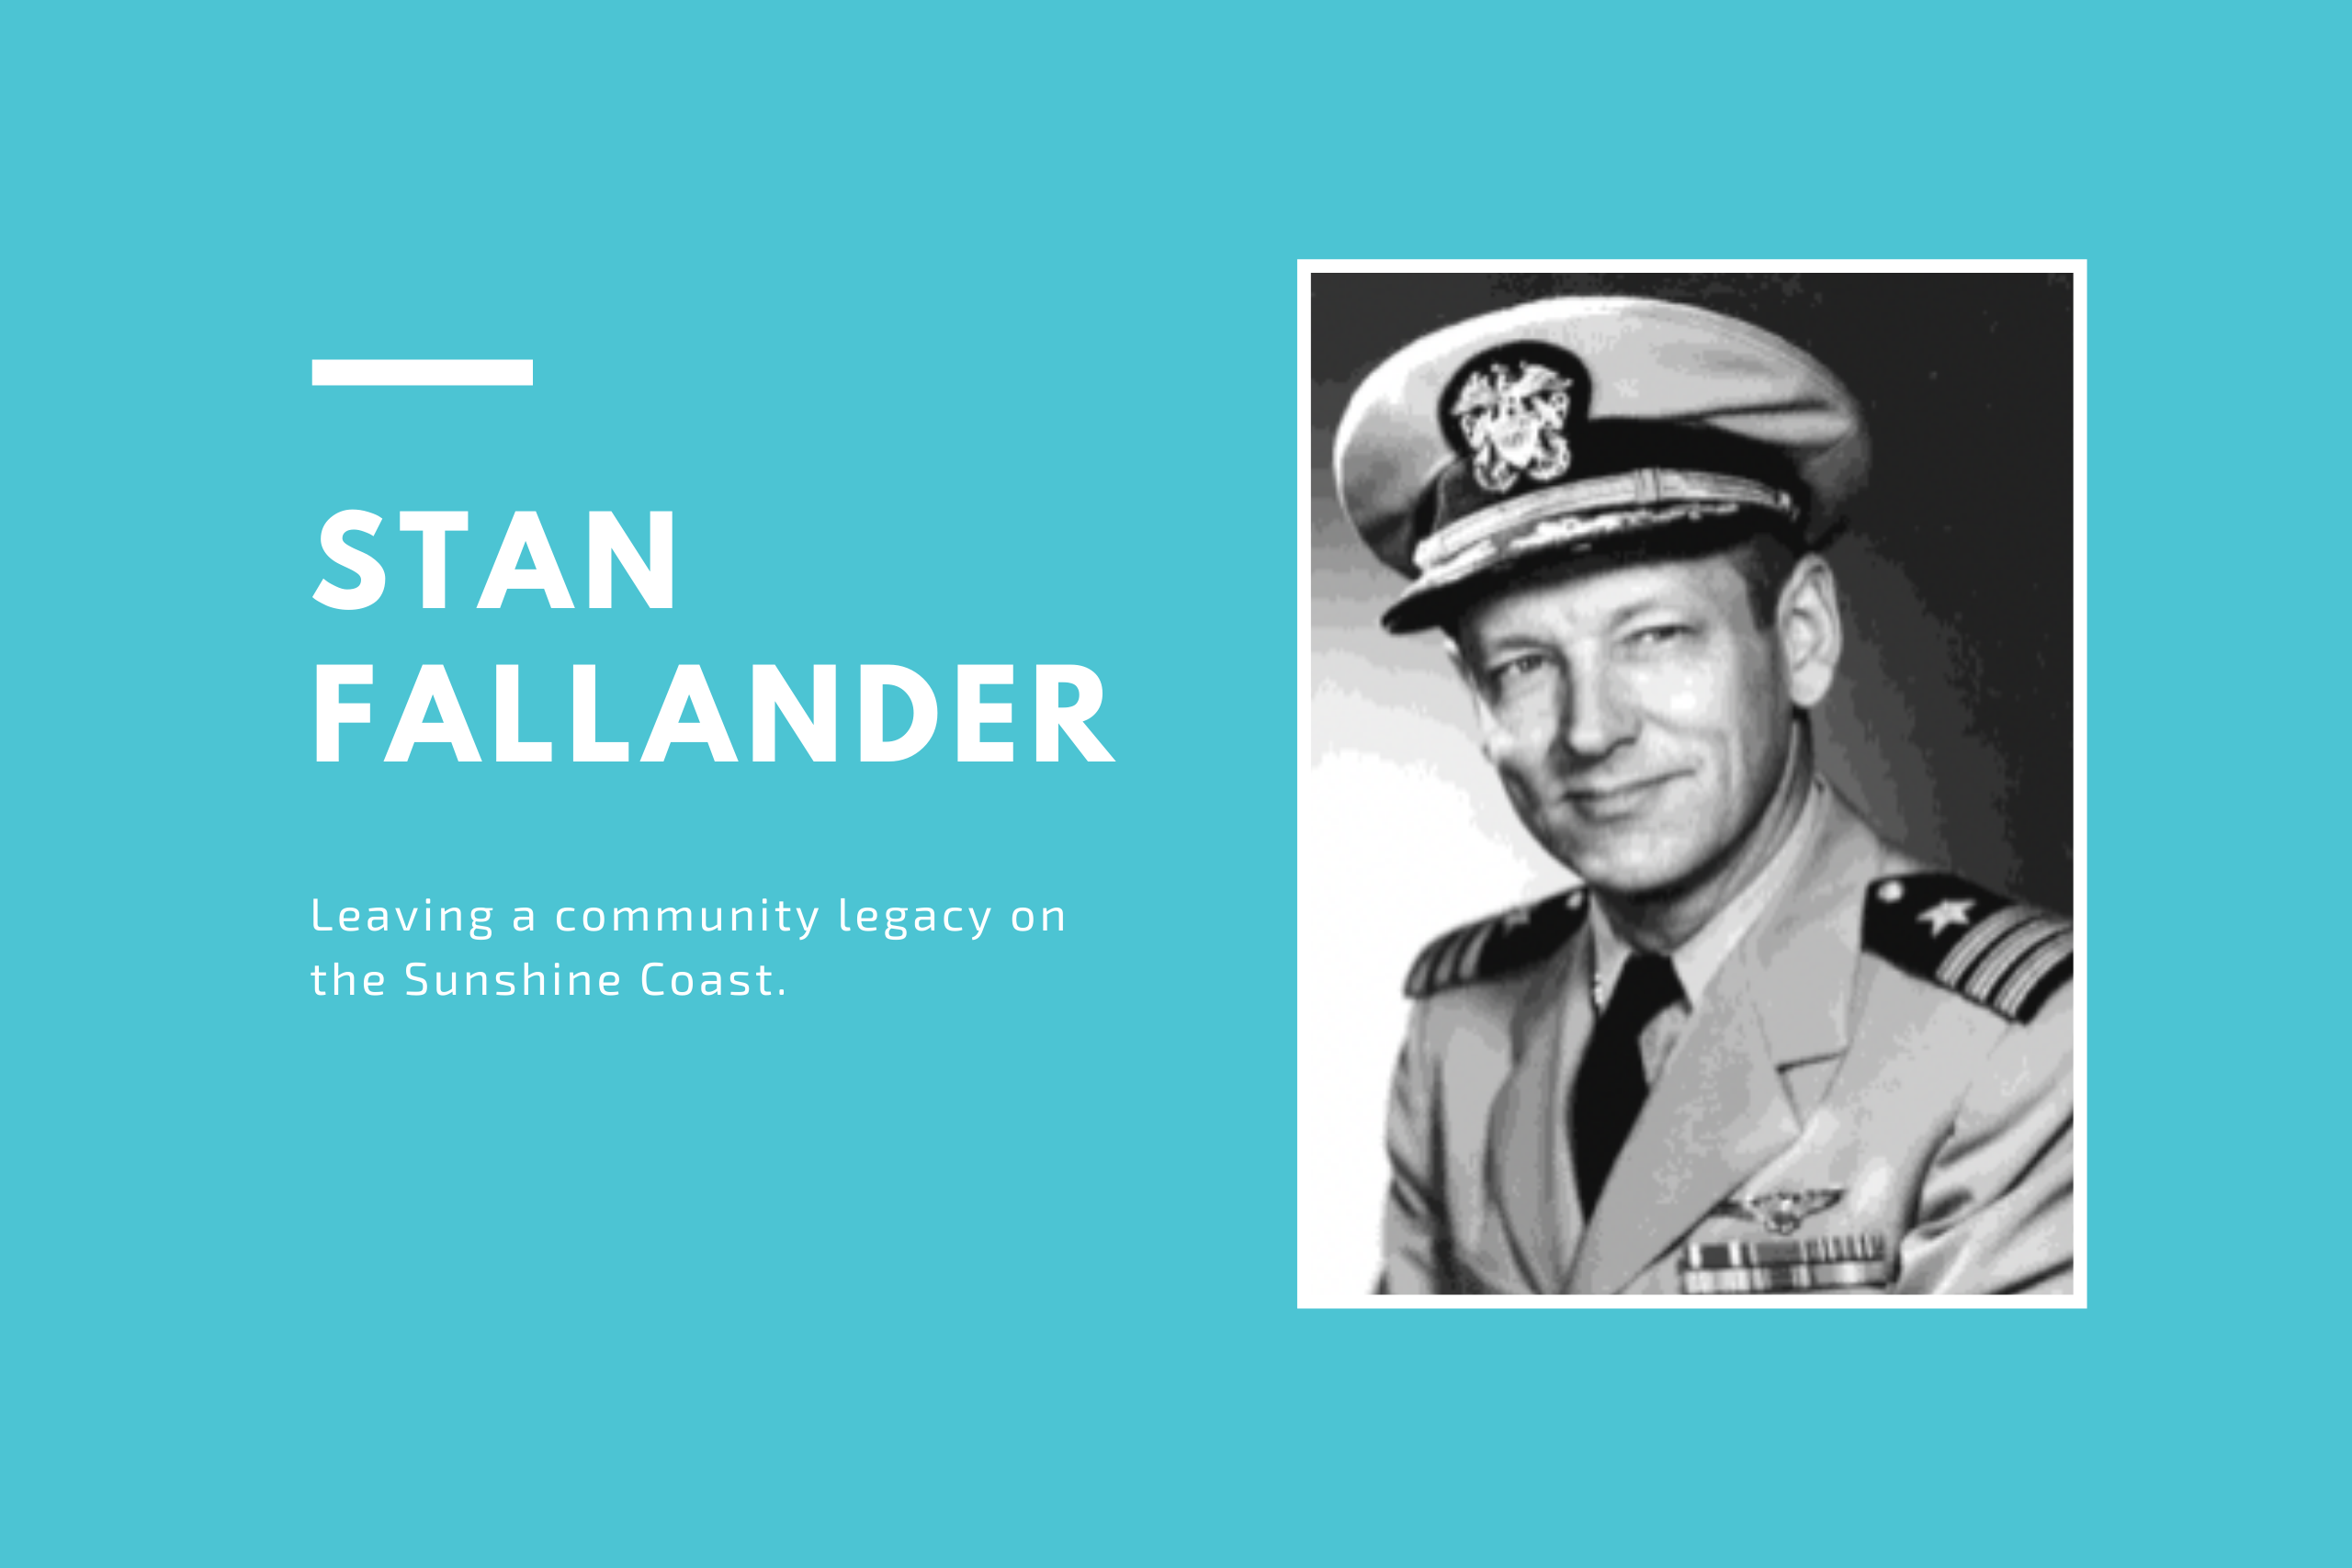 A black and white photo of US Navy Commander Stan Fallander in uniform, smiling. On a blue background with white text.